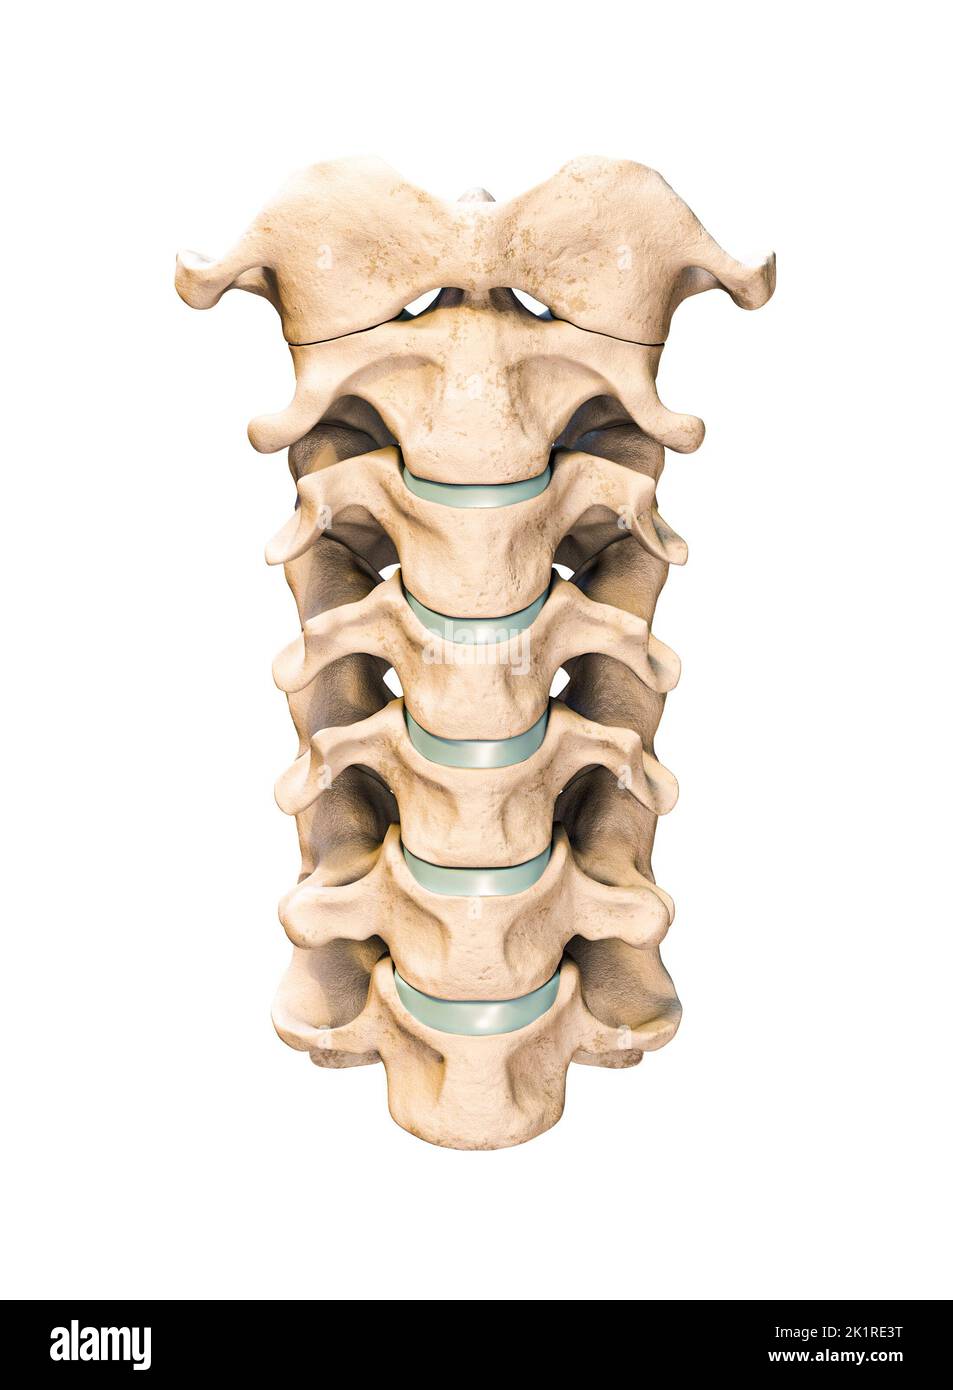 Anterior or front view of the seven human cervical vertebrae isolated on white background 3D rendering illustration. Anatomy, osteology, blank medical Stock Photo